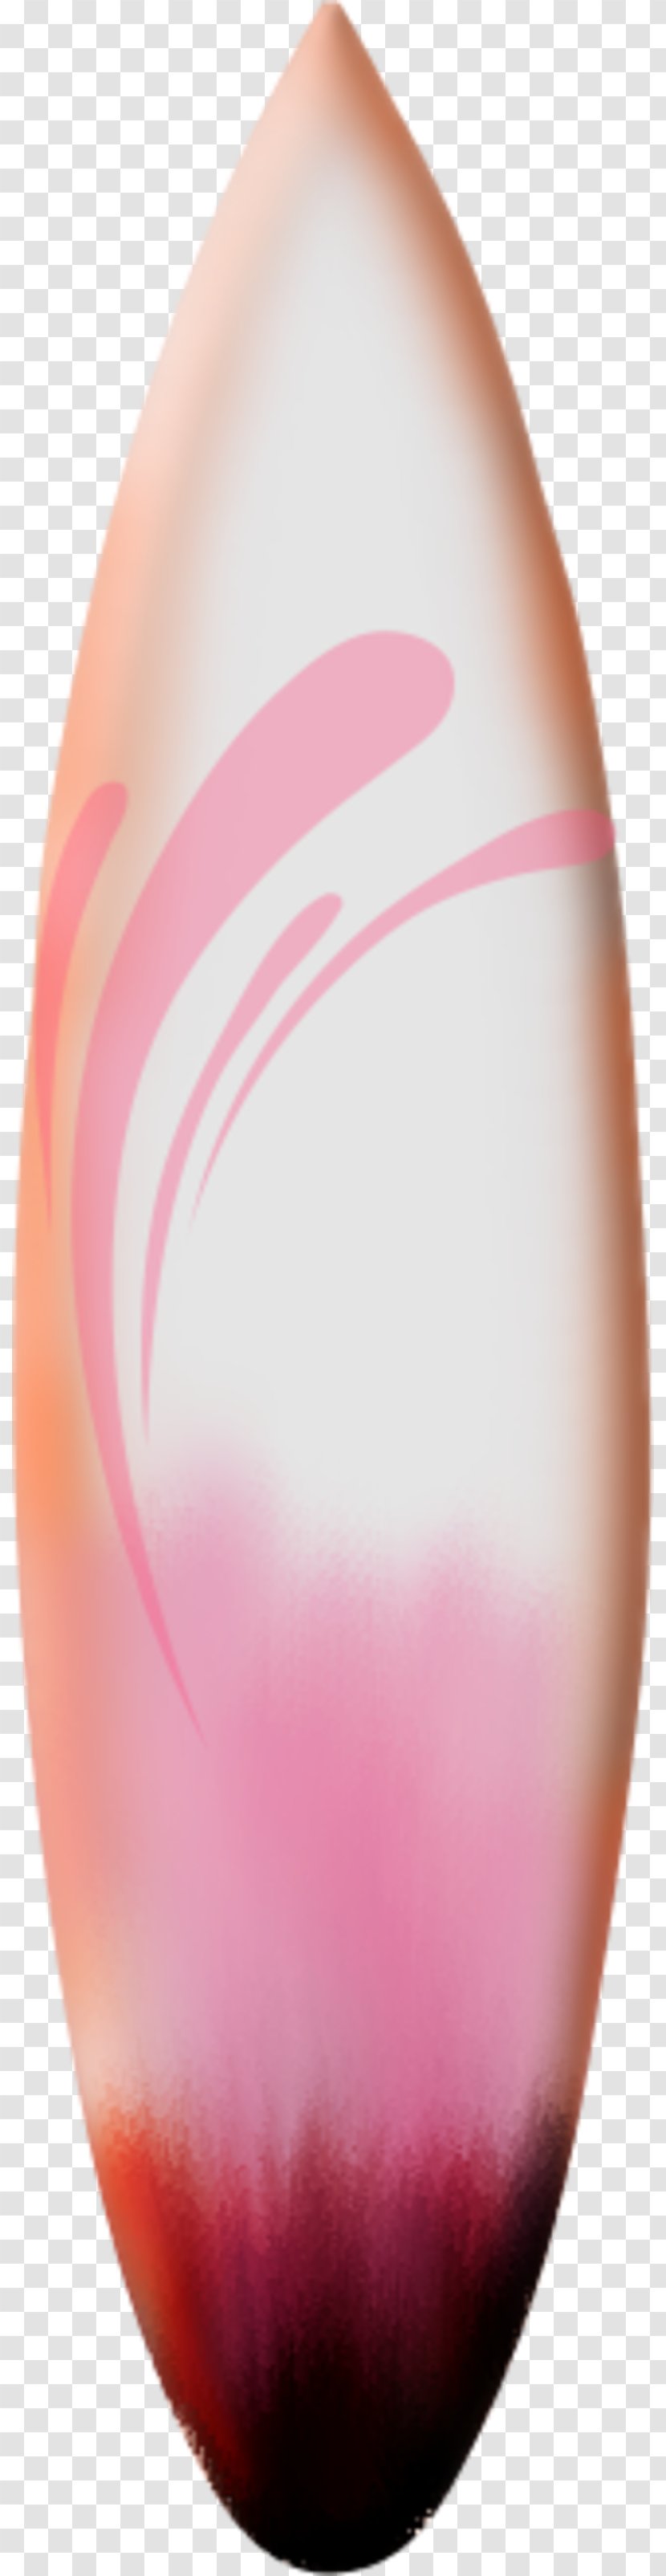 Surfboard Surfing Plank Egg - Peach Transparent PNG